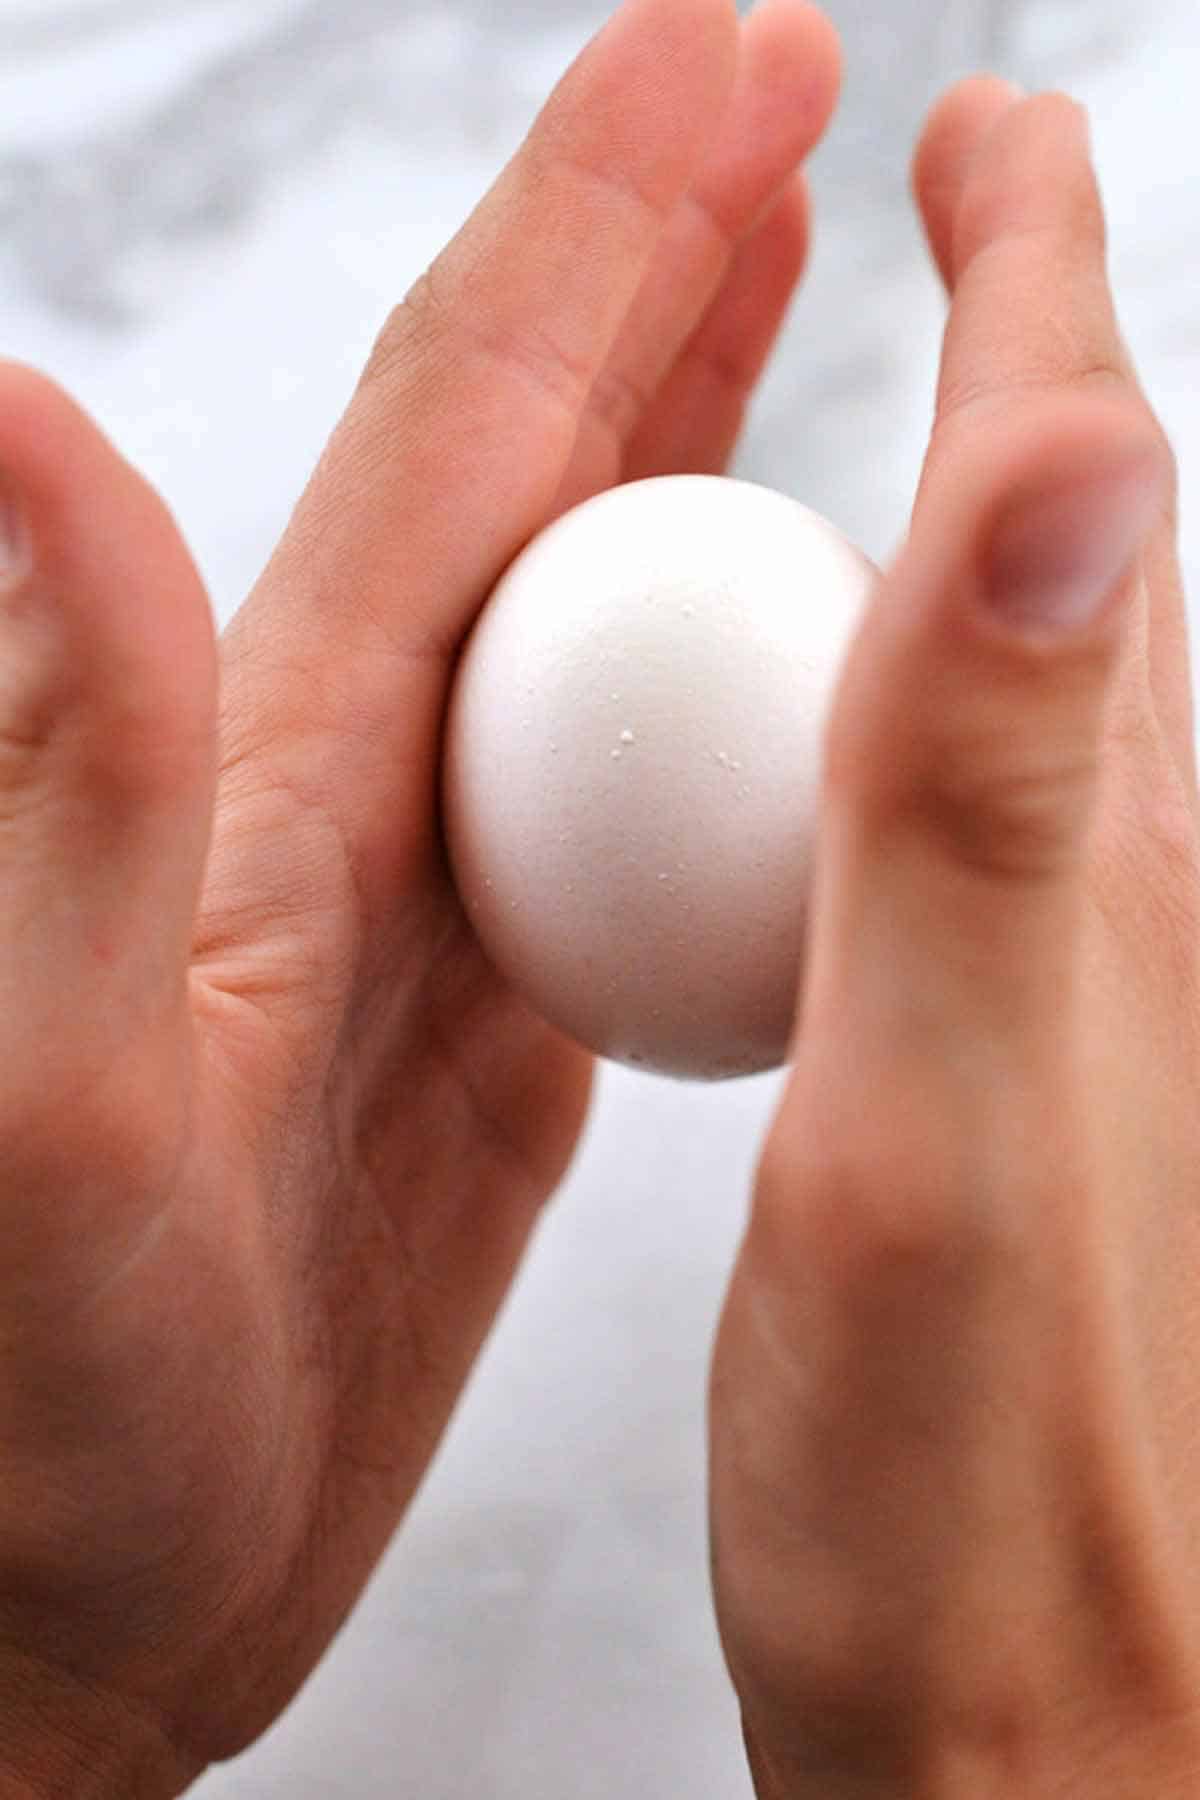 Rolling a cracked hard-boiled egg between palms to loosen shell.